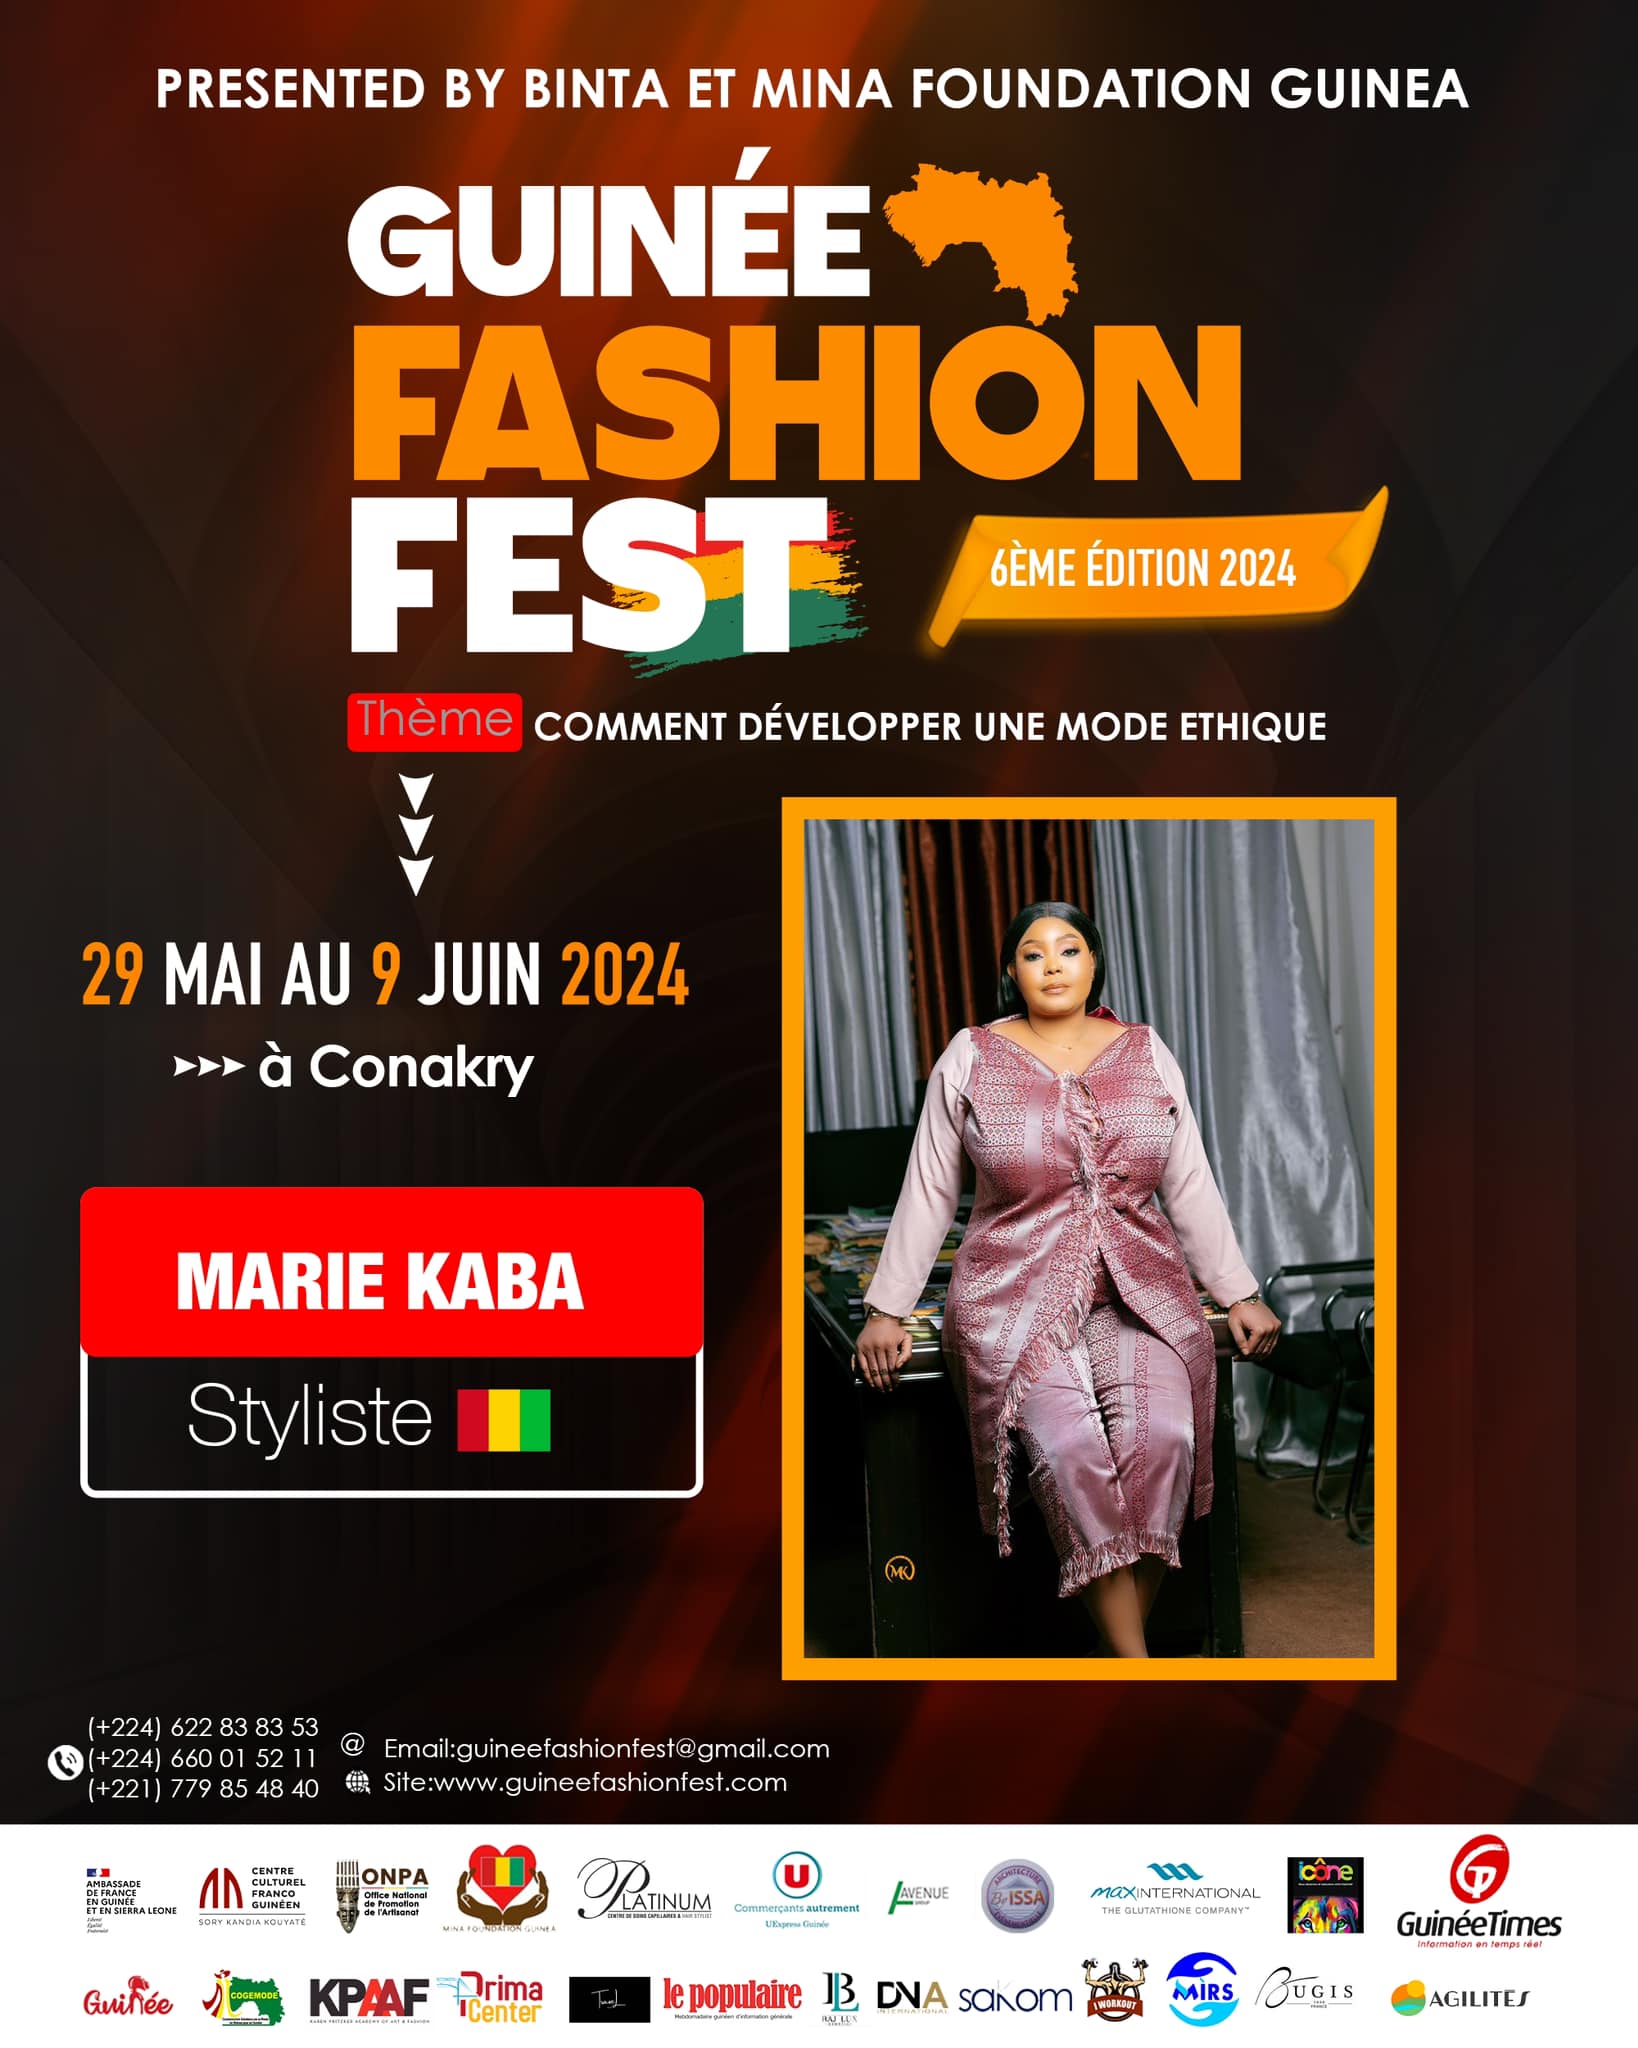 GUINÉE FASHION FEST PRESENTS MARIE KABA FROM MALI